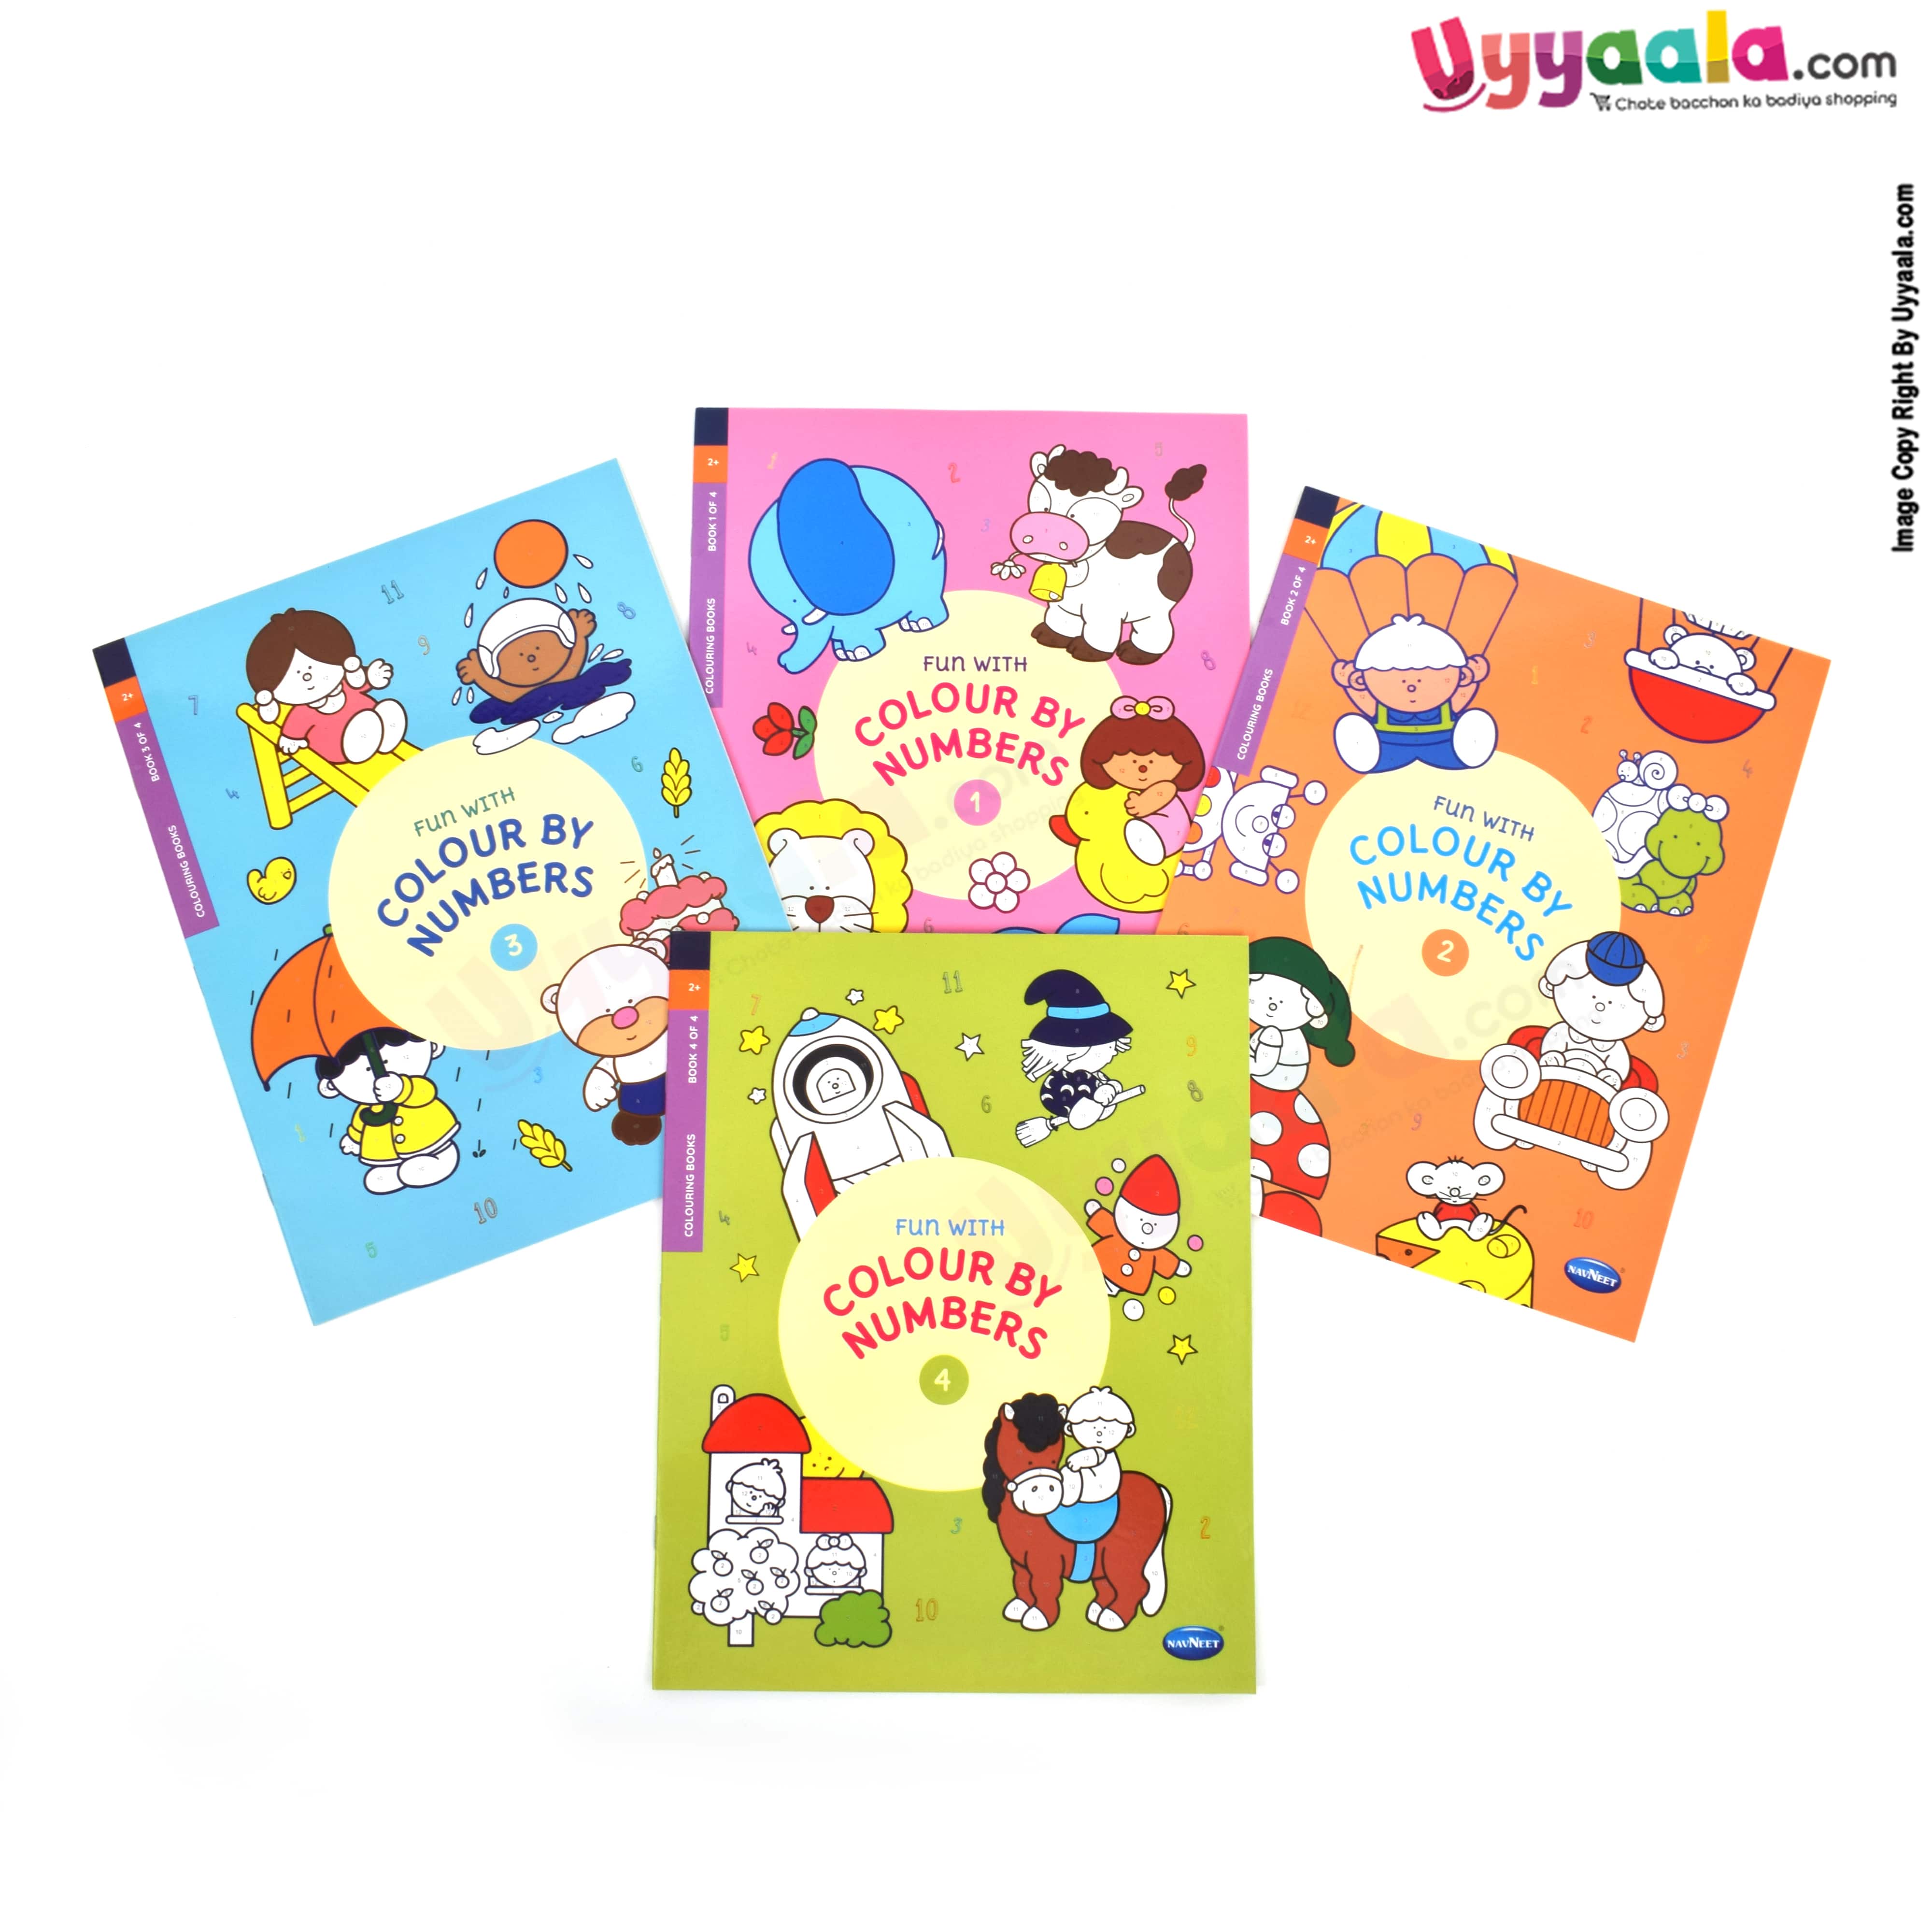 NAVNEET fun with colors by numbers, Pack of 4 - 4 volumes